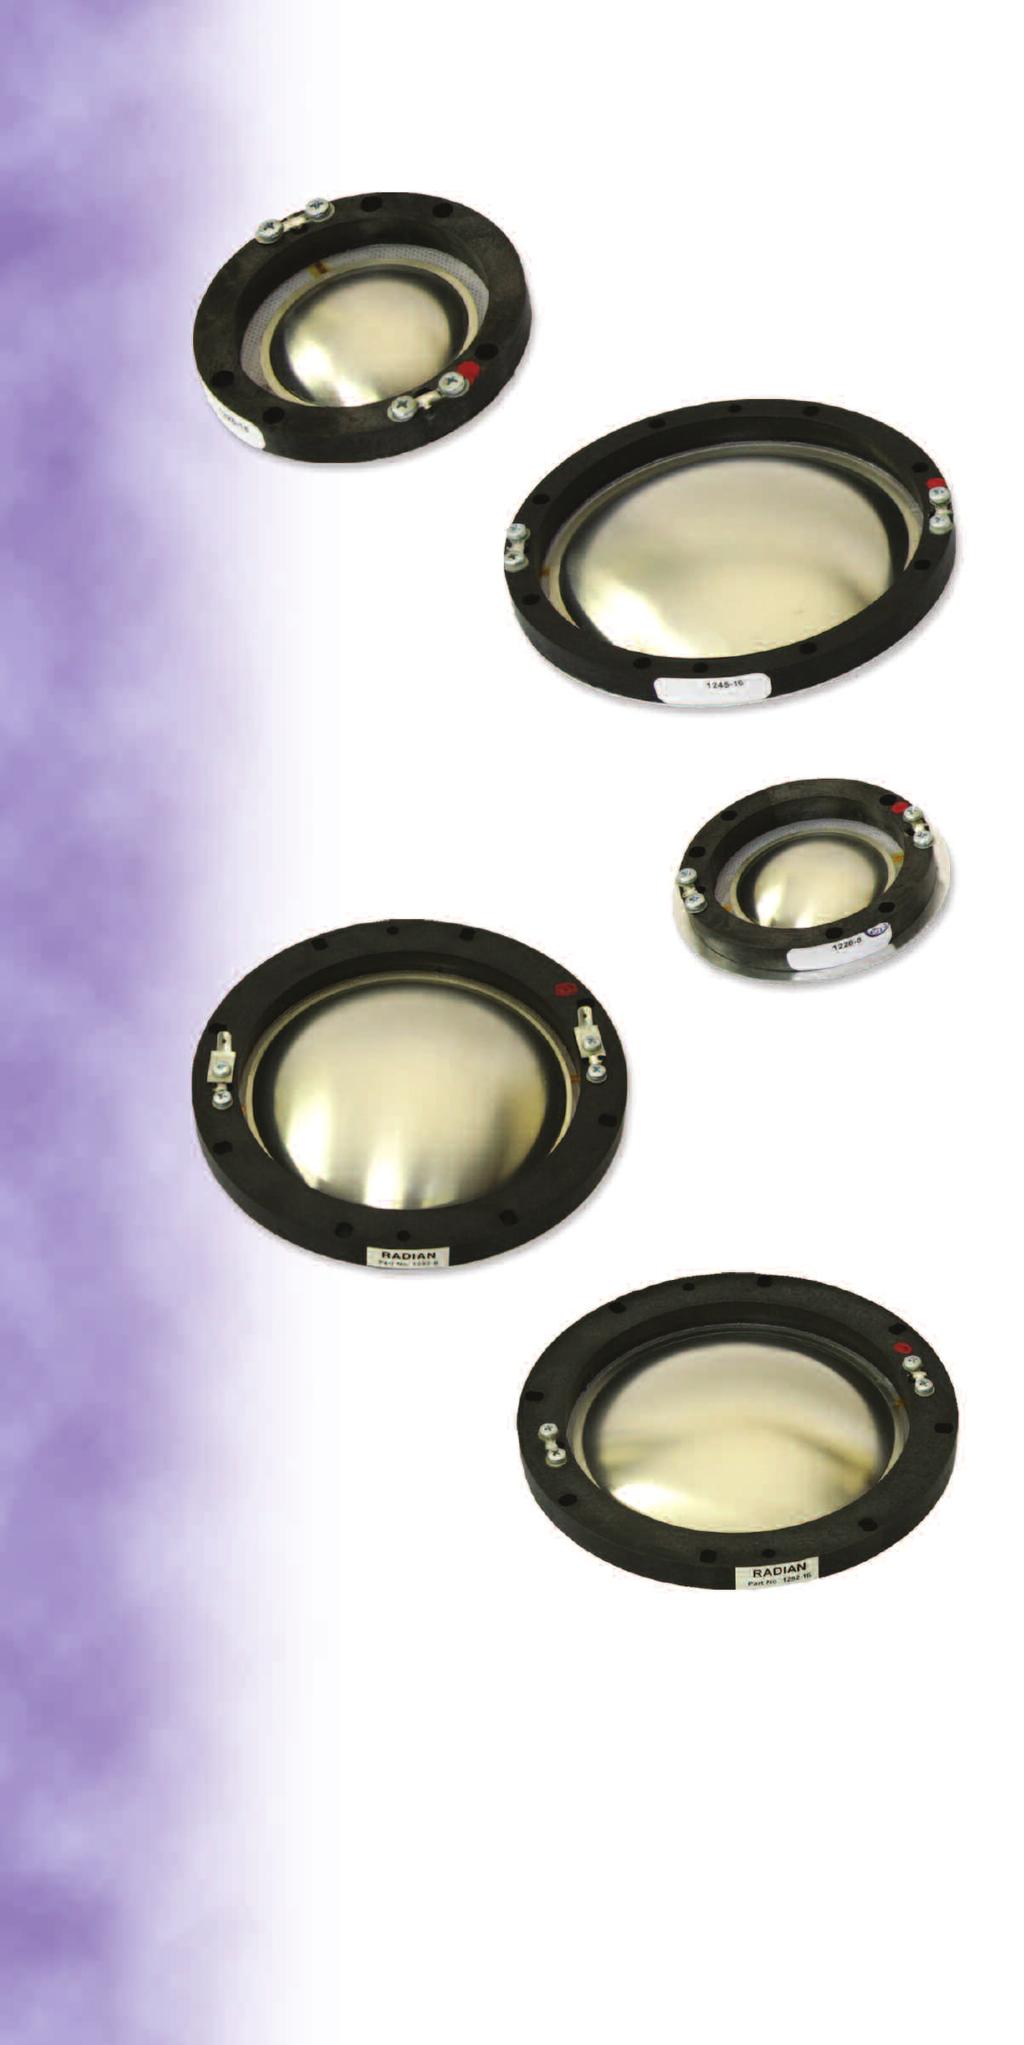 DIAPHRAGMS 1225 1245 1228 1292 1282 High Power Handling Extremely Low Distortion Extended Hi-Frequency